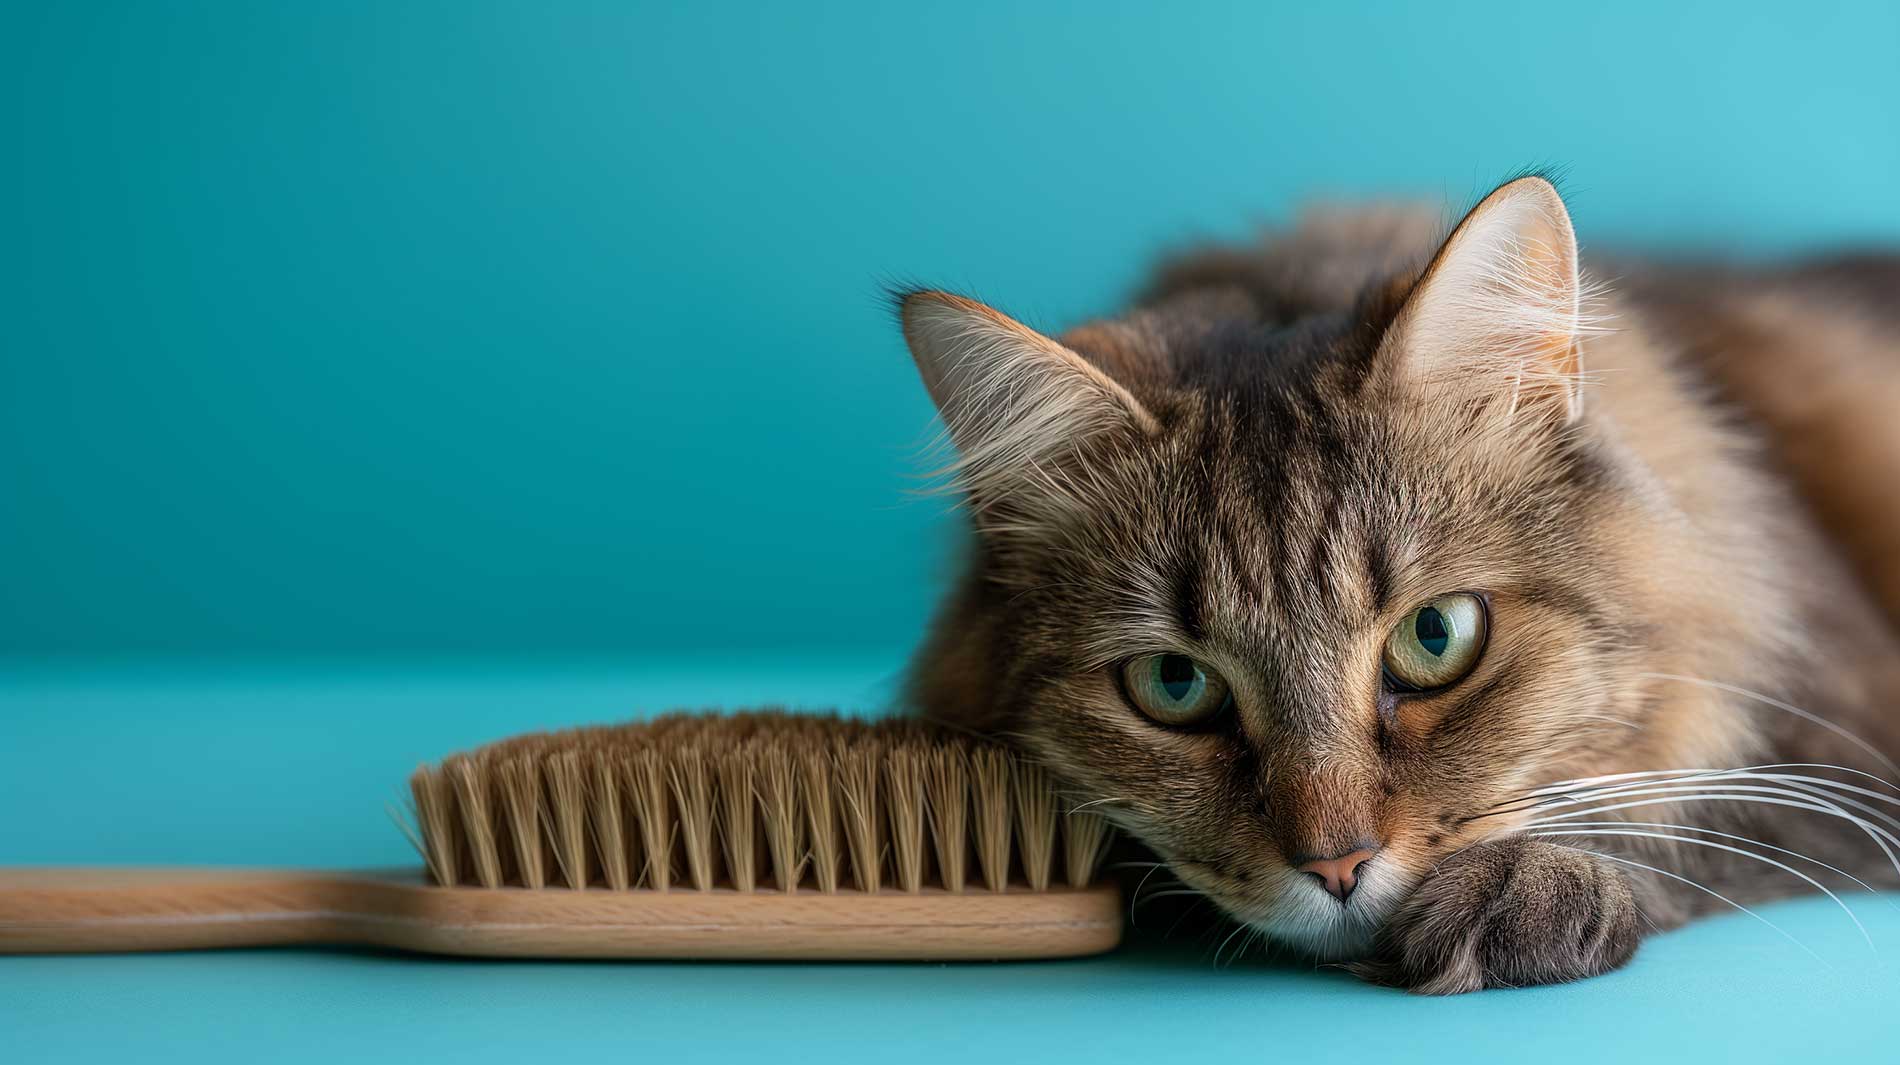 Brown tabby cat with long hair rubbing against wooden slicker brush in front of bright turquoise background